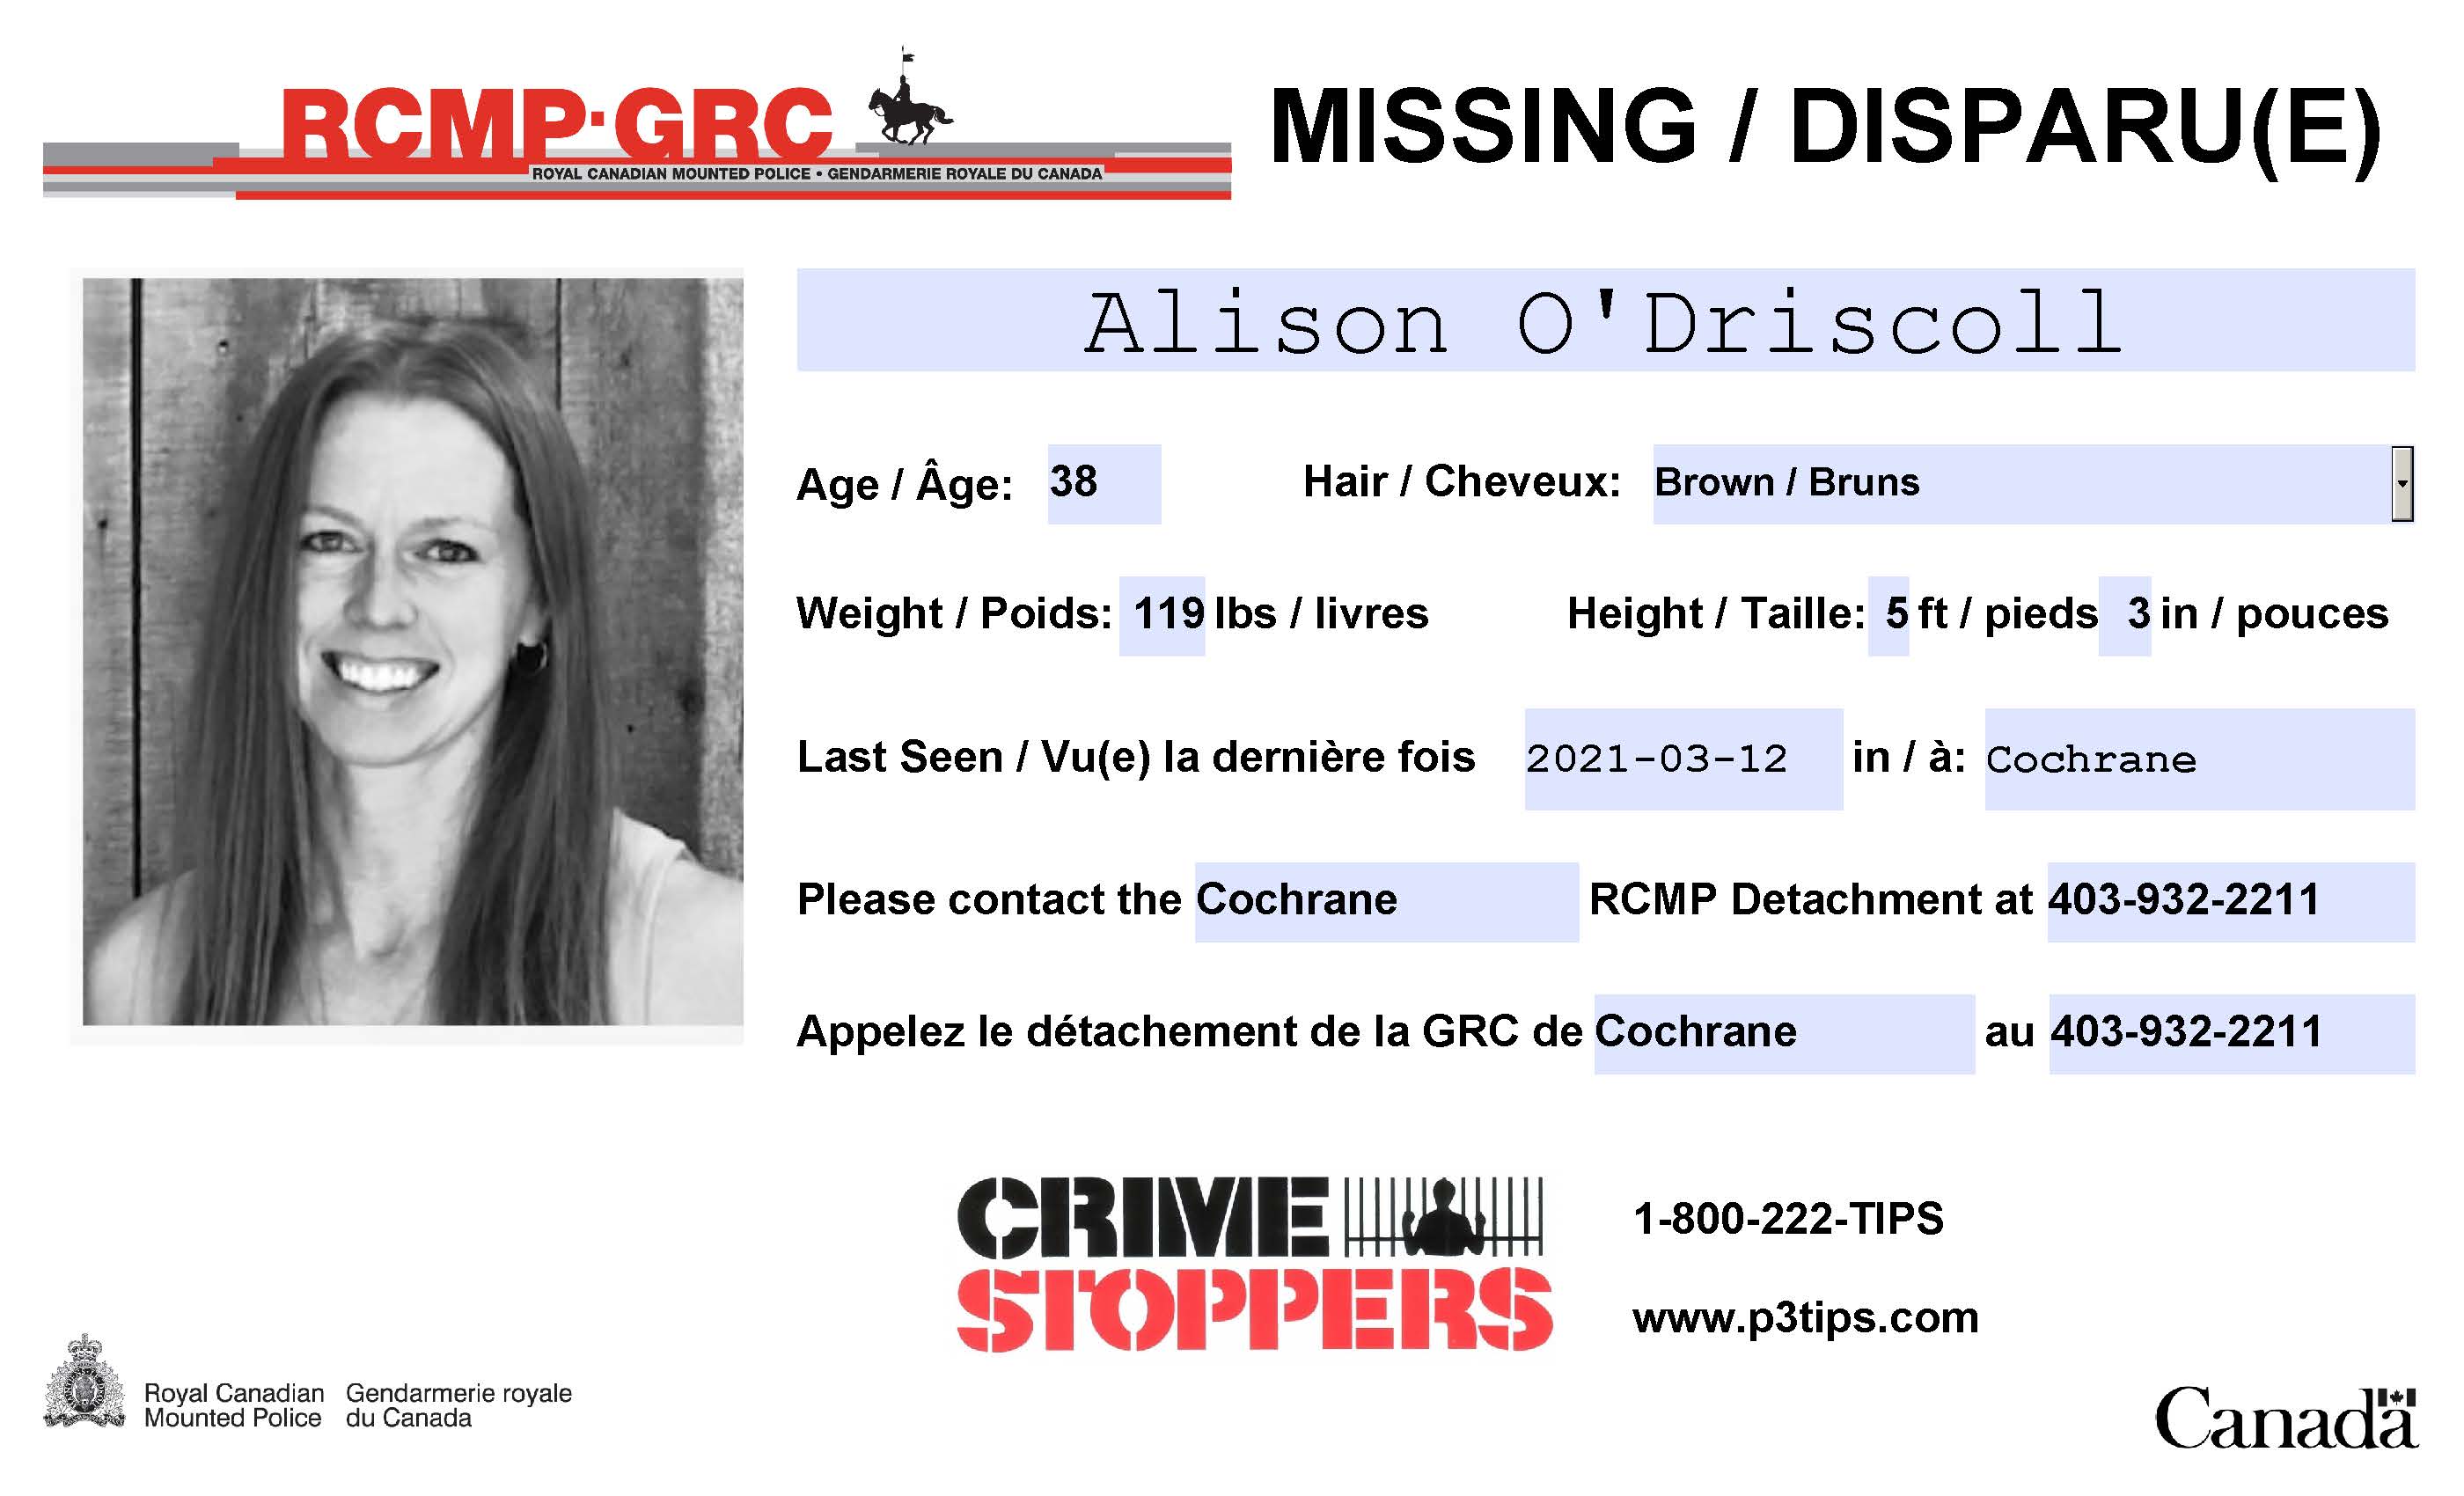 A%20O%27Driscoll%20Missing%20Person%20Poster.jpg